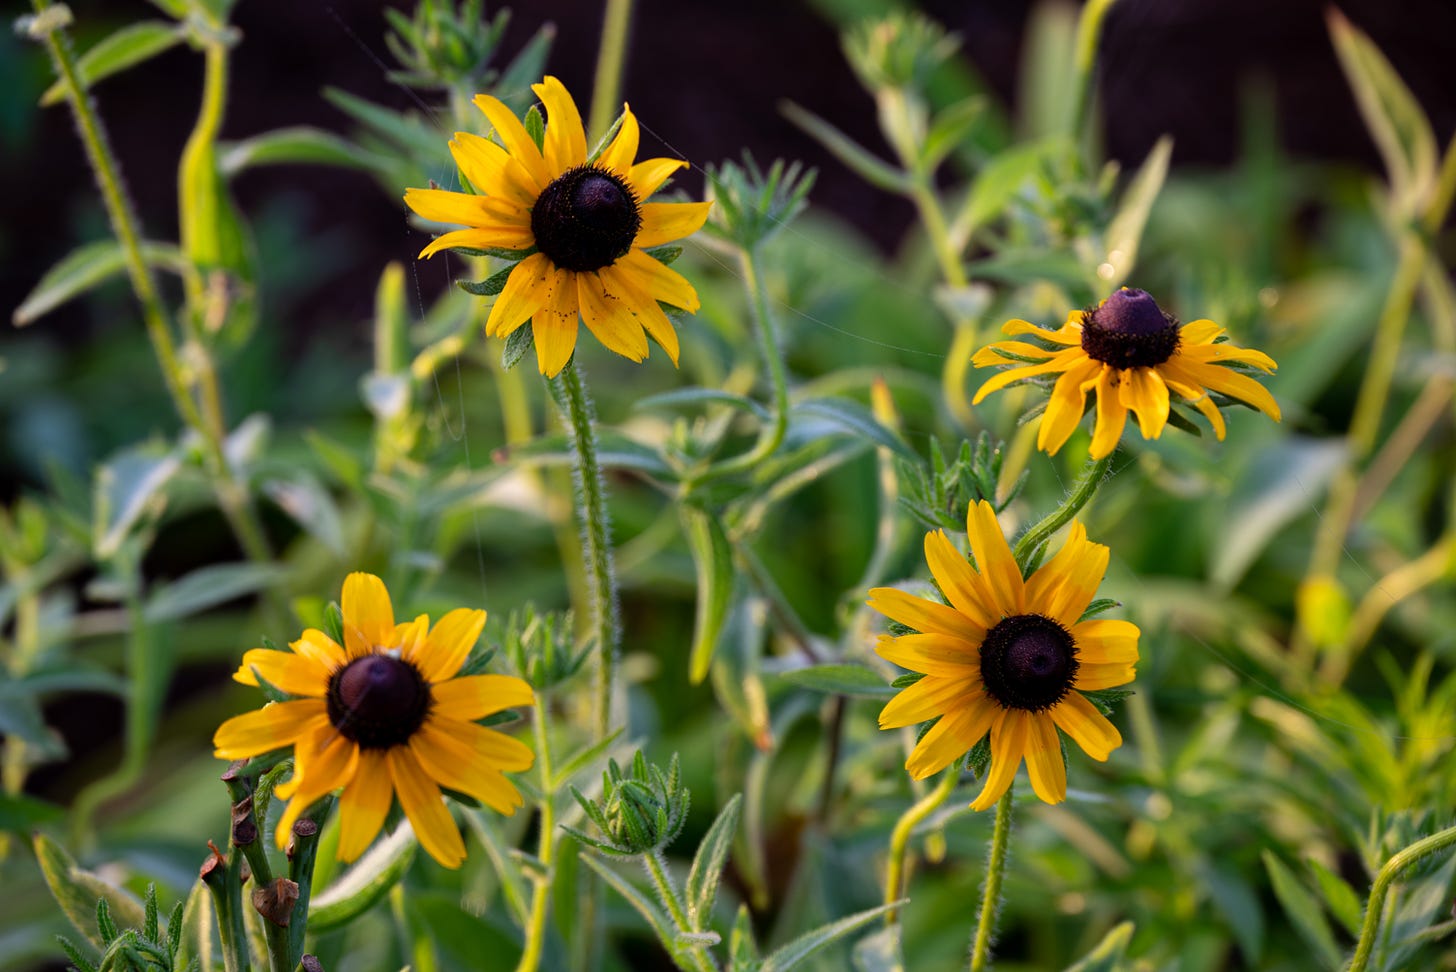 A group of four Brown-Eyed Susans, Bright yellow petals with large dark brown centers among their green eaves